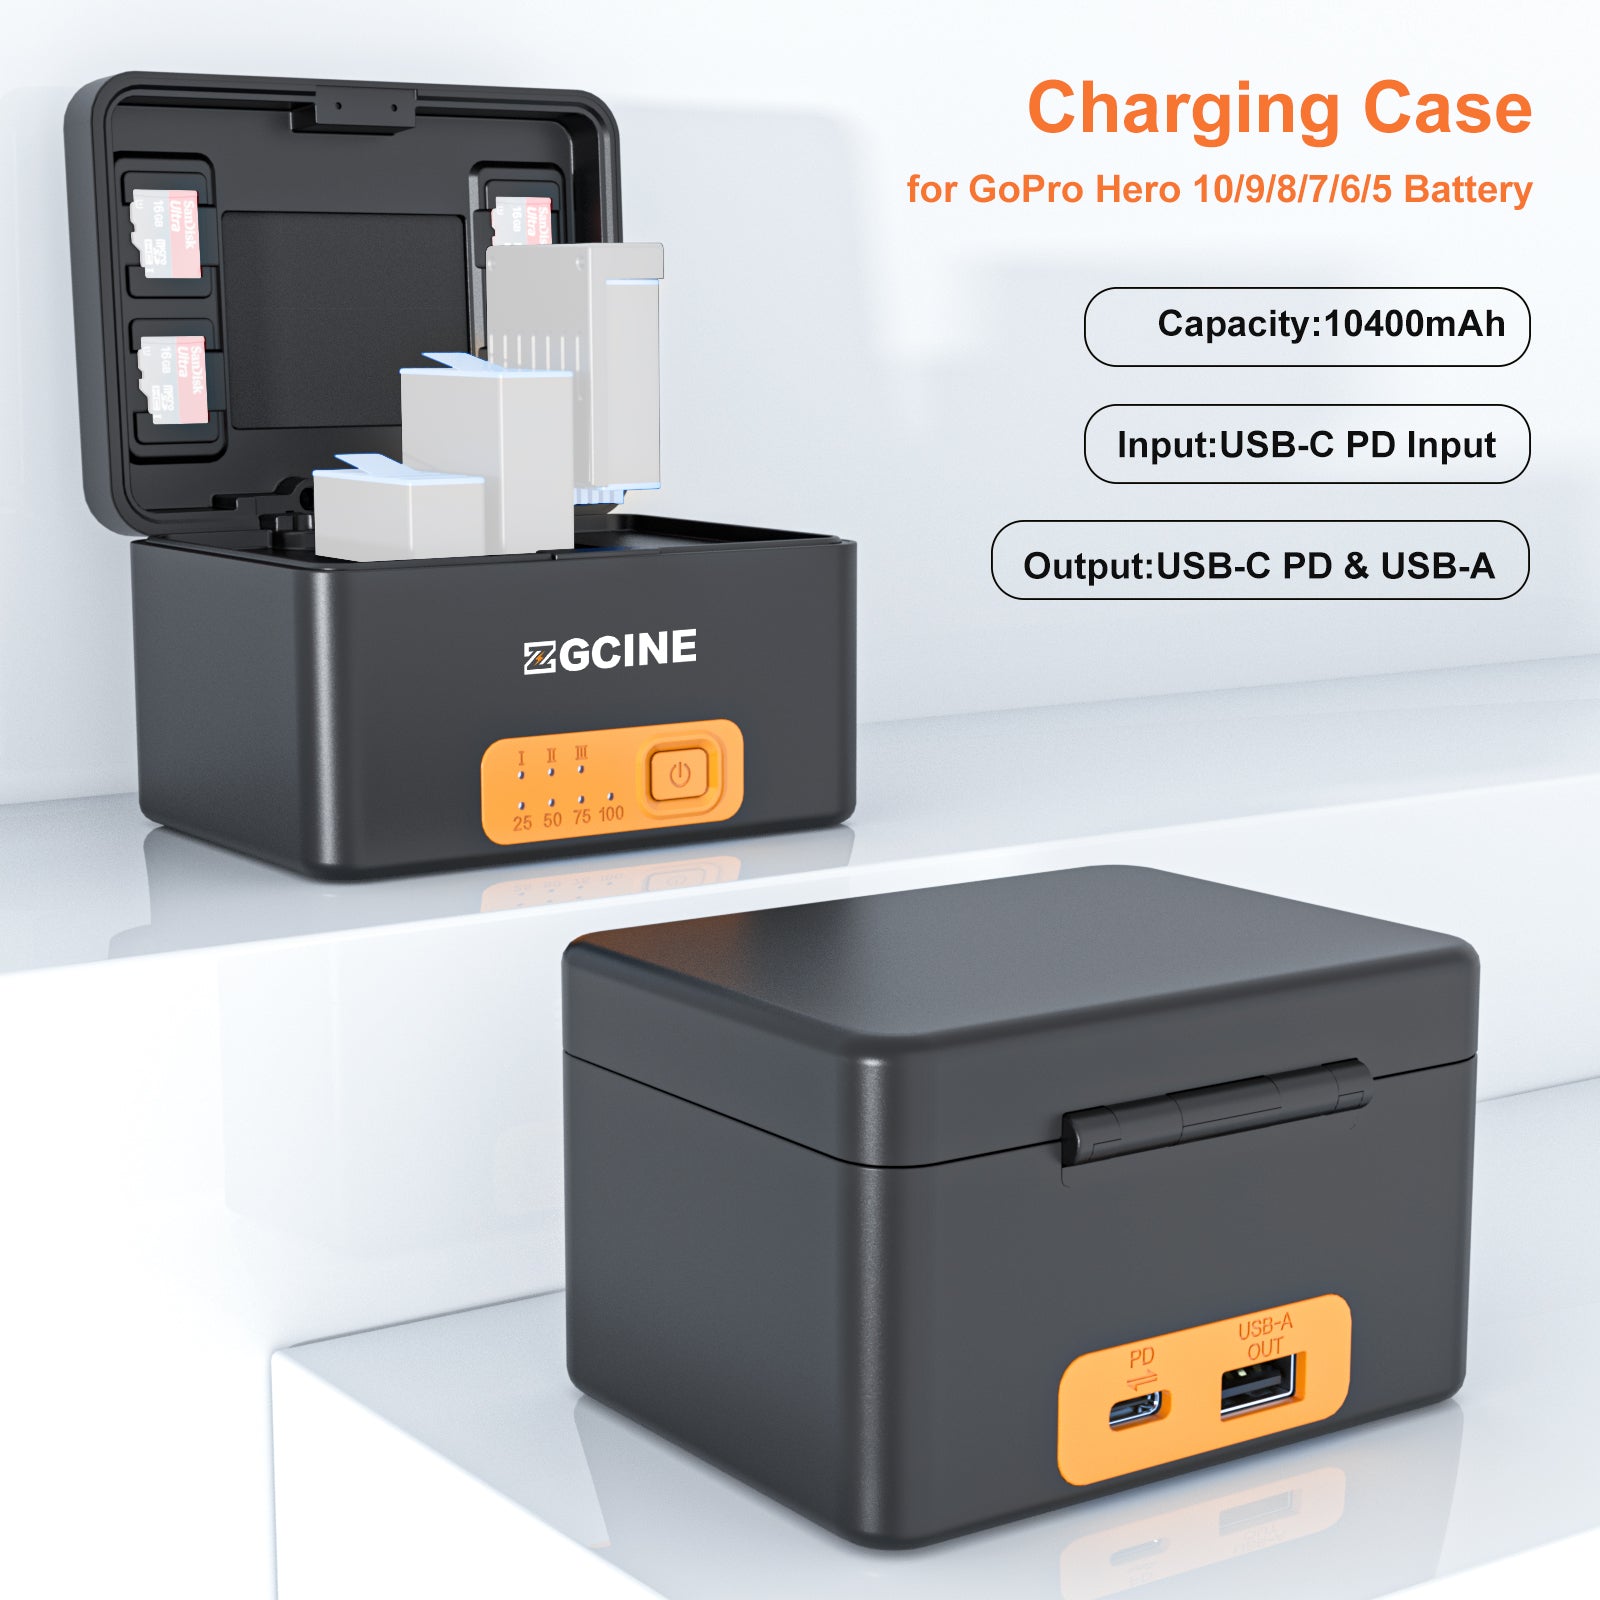 ZGCINE Charging Case for GoPro 11/10/9/8/7/6/5 Battery with 3 C